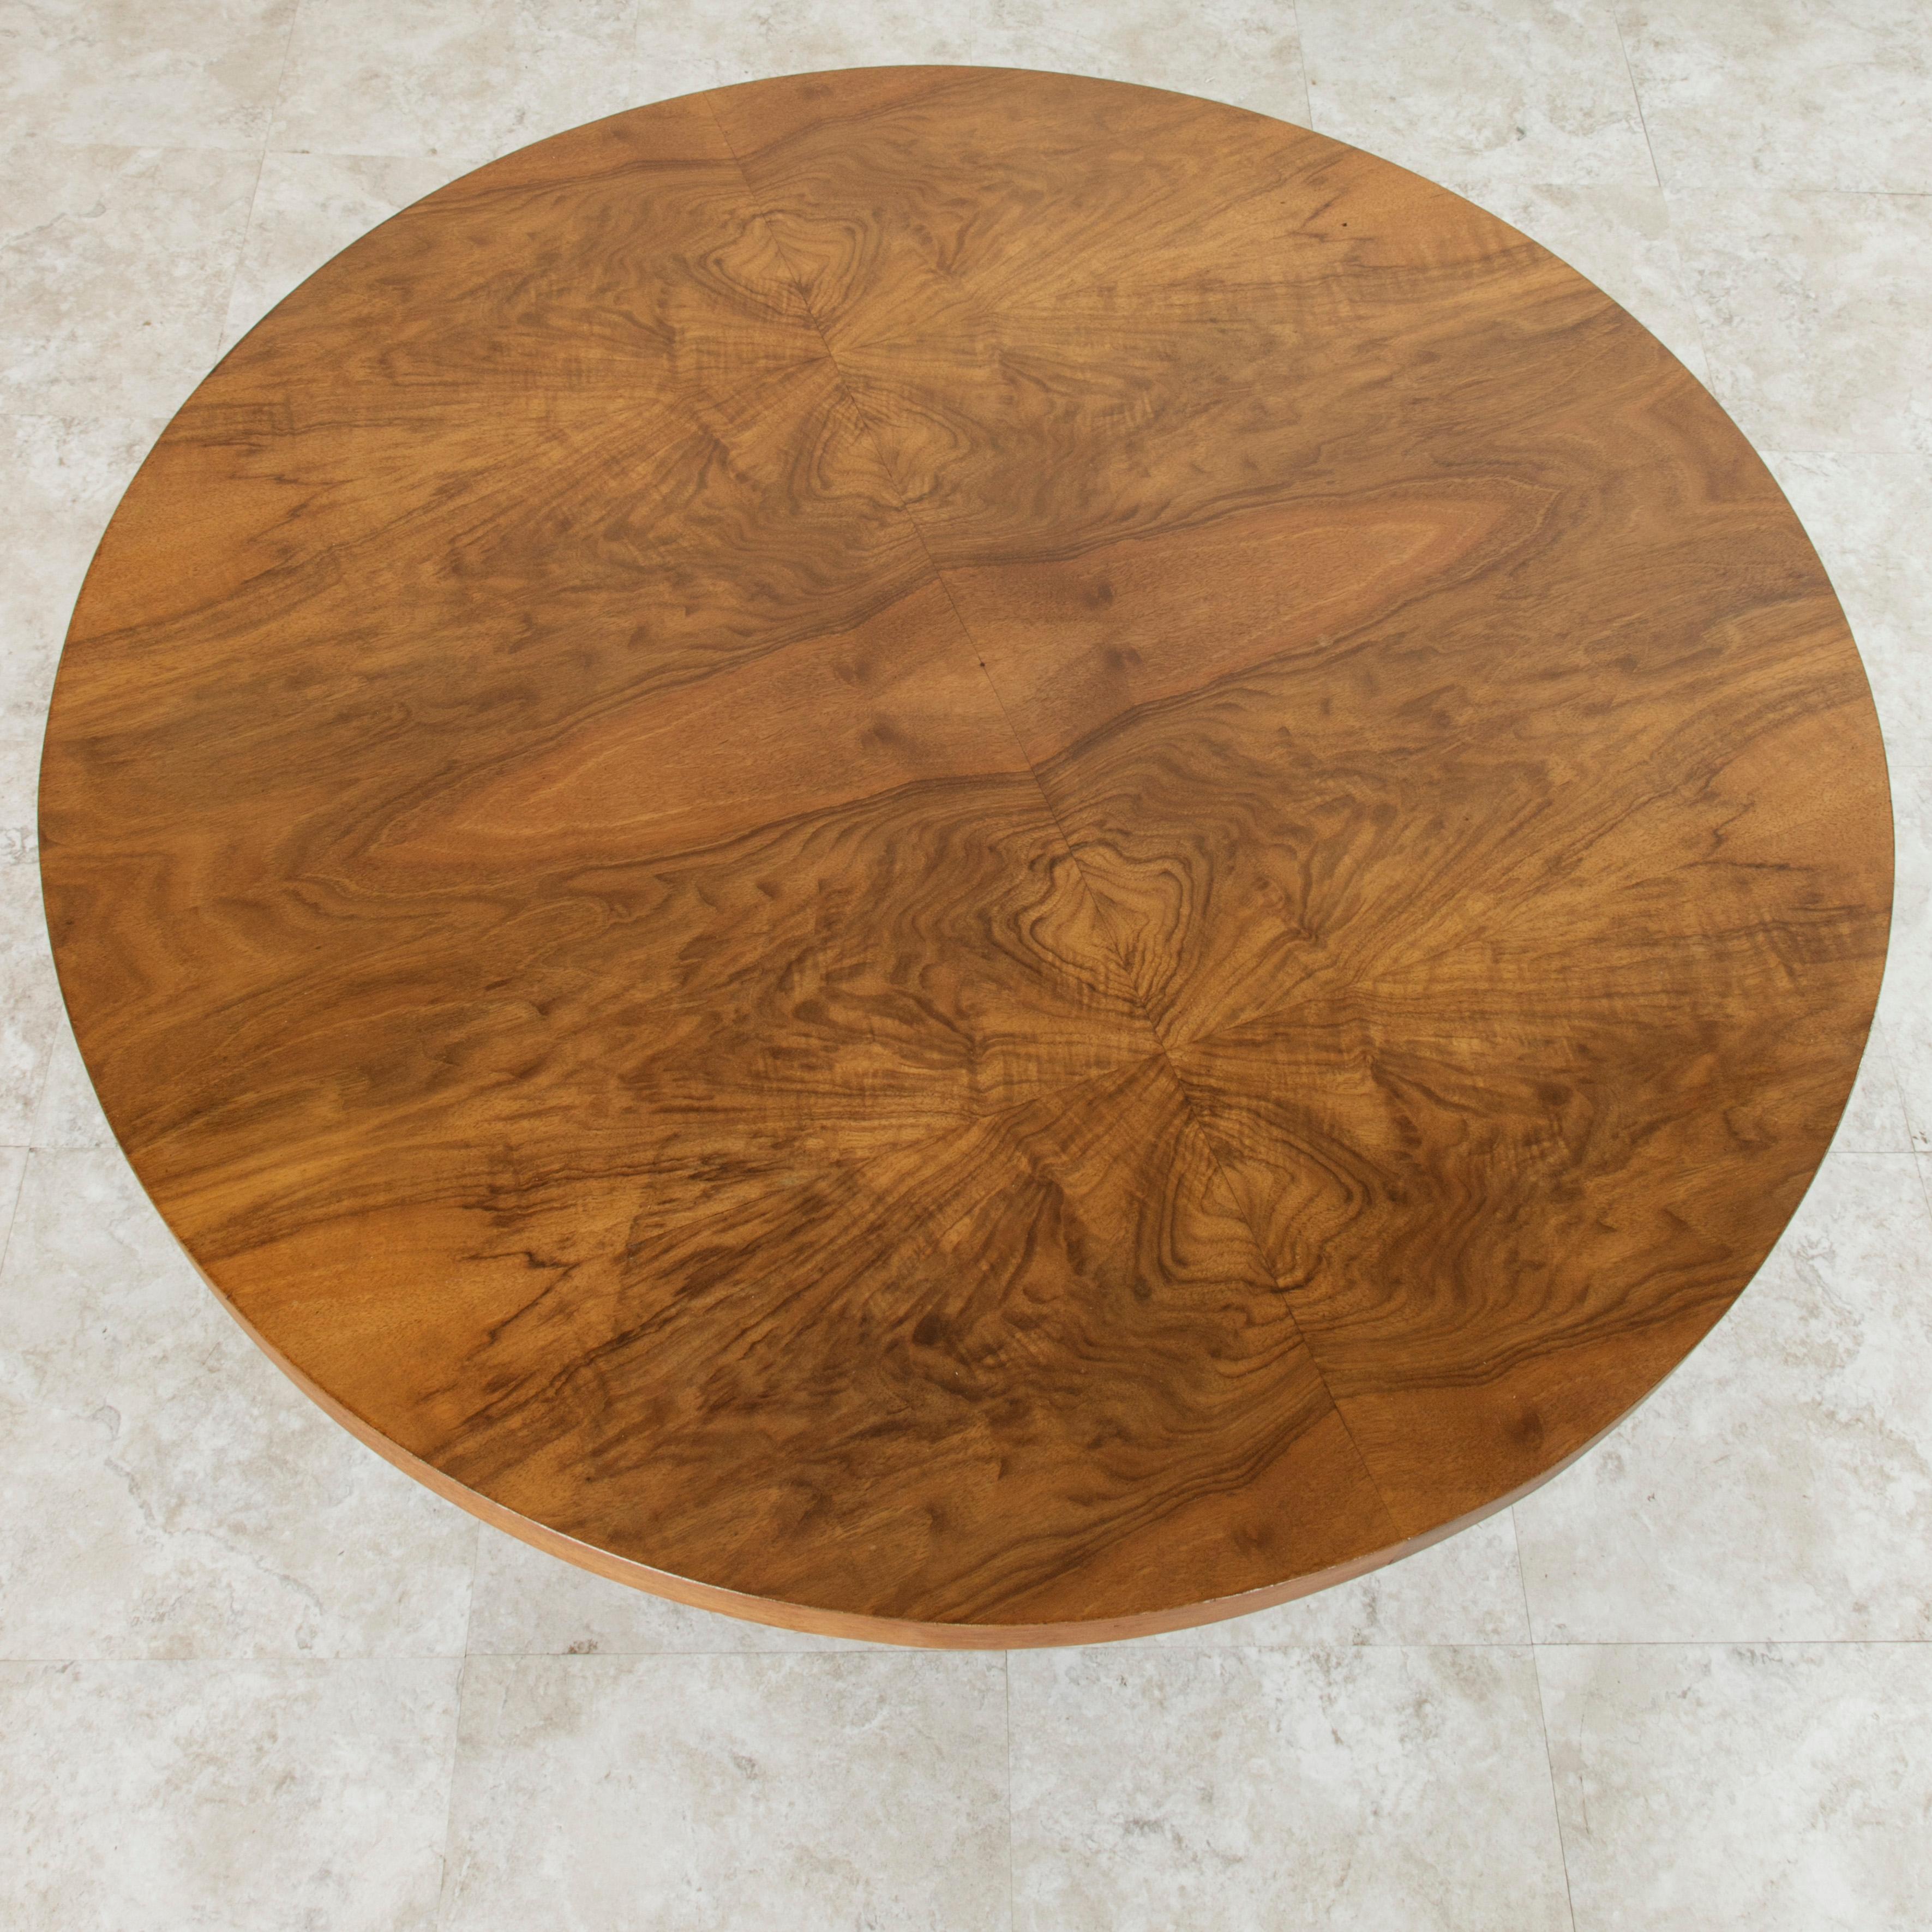 This early 20th century French Art Deco period coffee table or cocktail table features a beautiful 31.5 inch diameter bookmatched burl walnut top supported by four curved palisander legs. A fine example of Classic French Art Deco, this table was